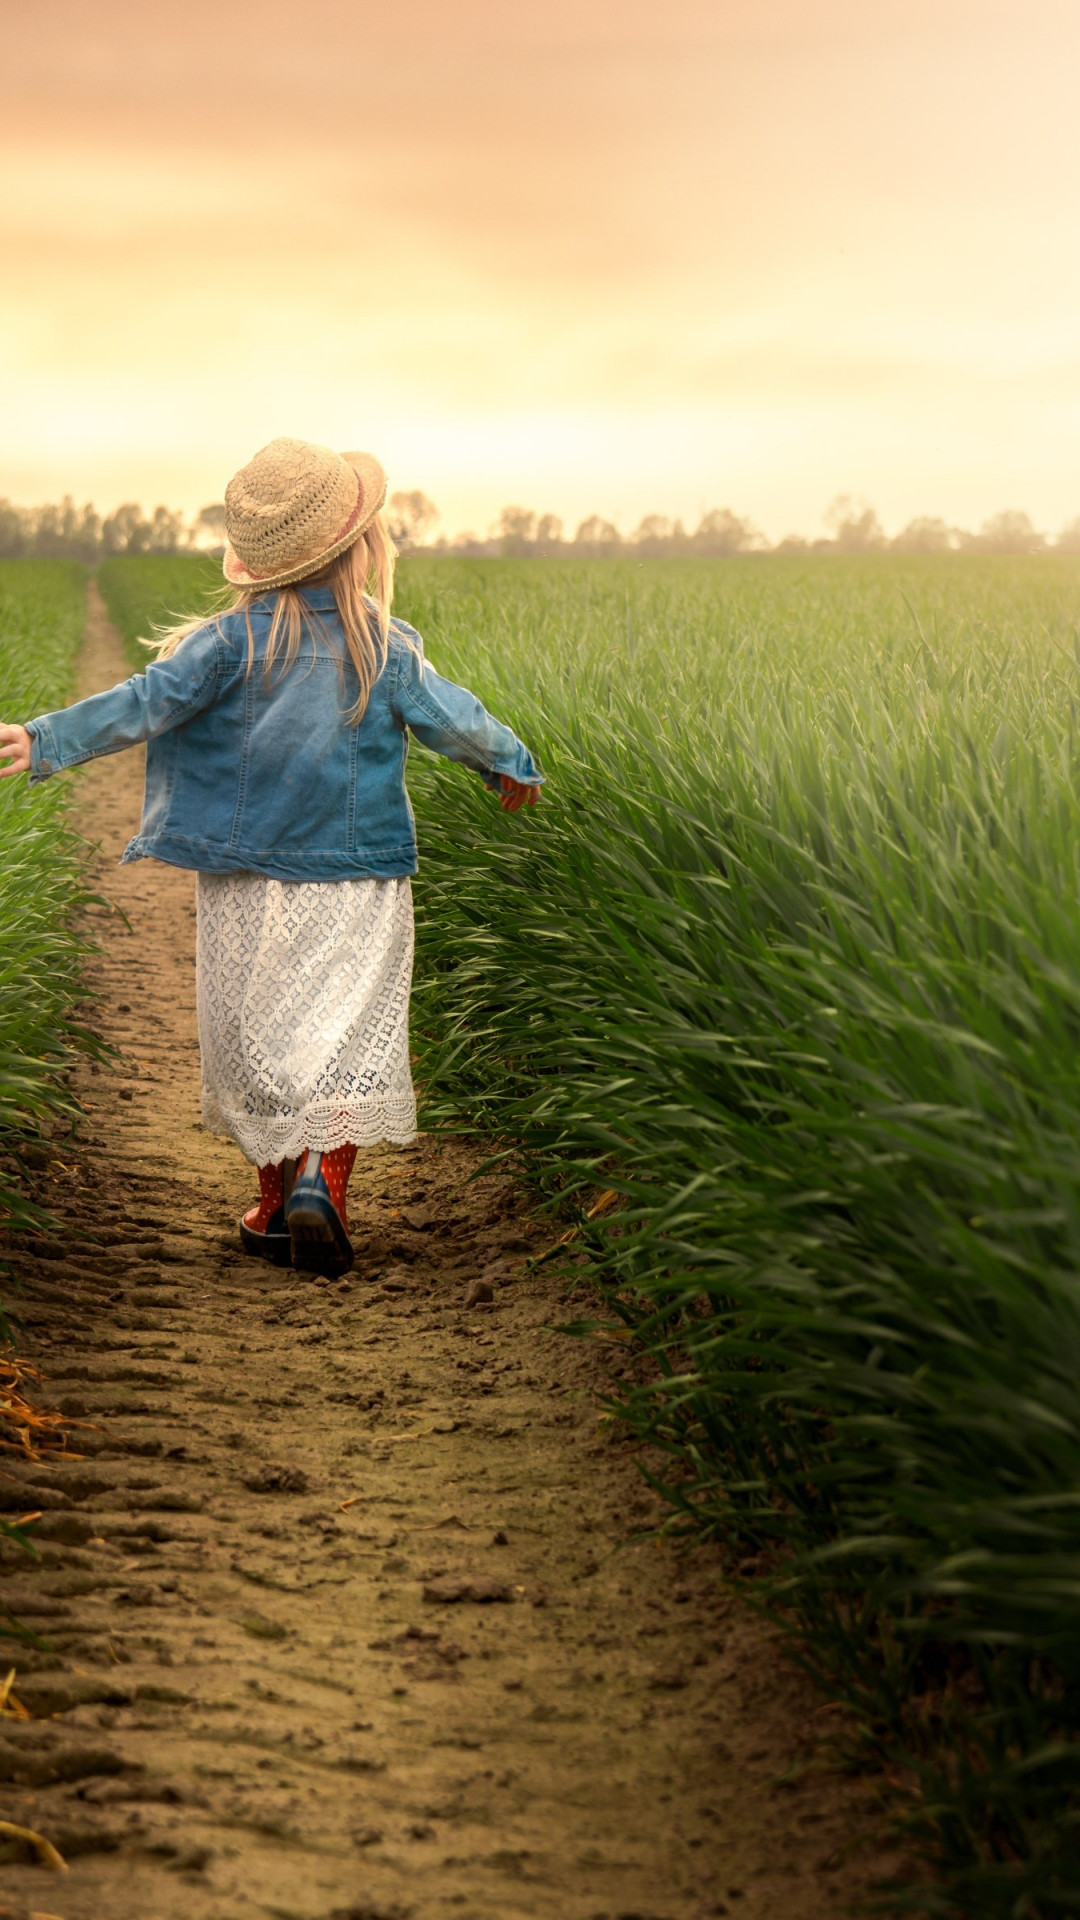 Child in the green field at sunset wallpaper 1080x1920